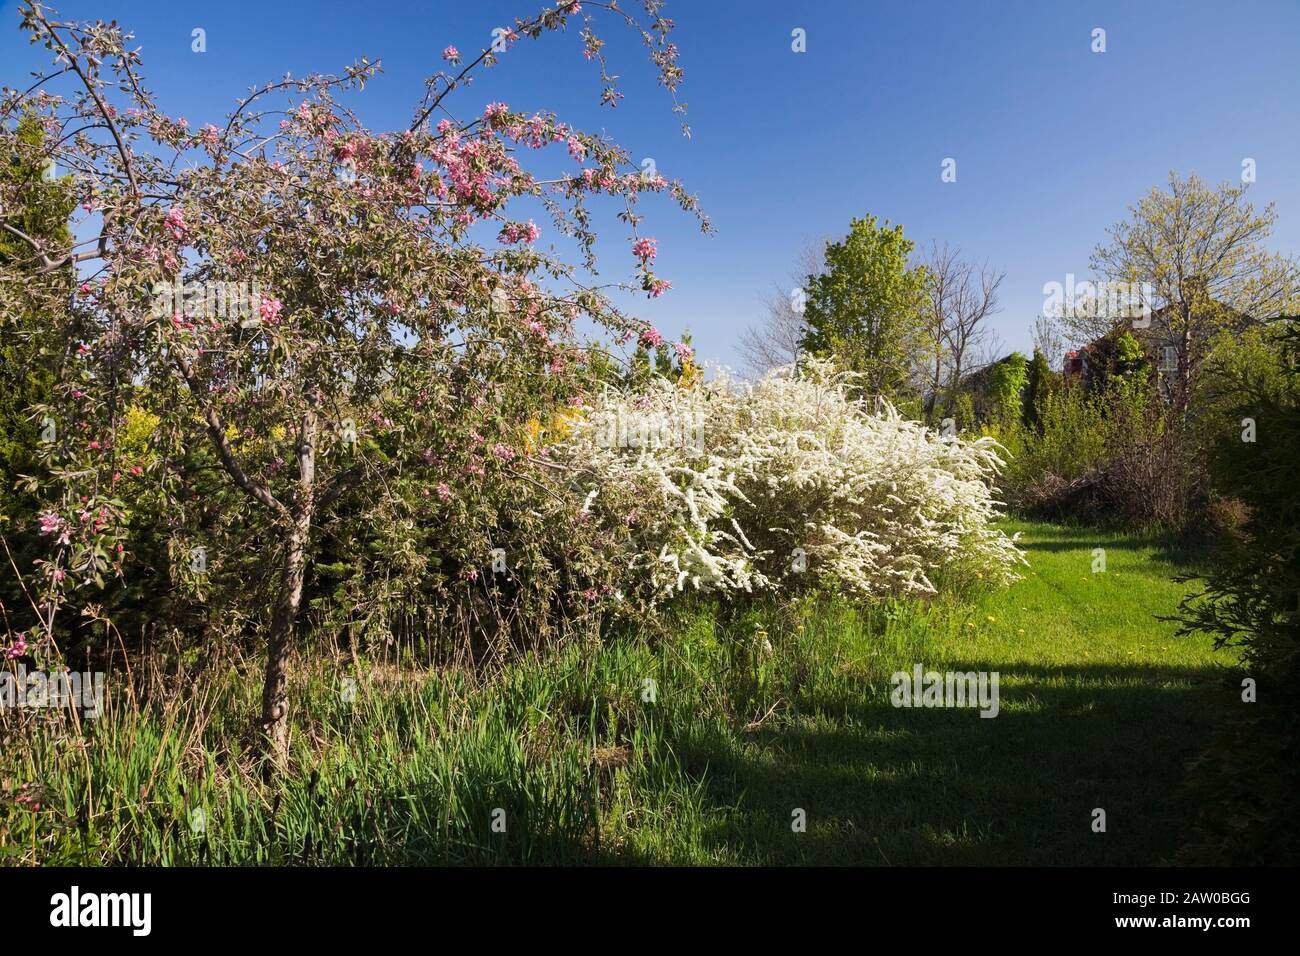 Grass path next to border with Pyrus malus - Crabapple tree in bloom and a Spirea Arguta Graciosa shrub in backyard country garden in spring Stock Photo